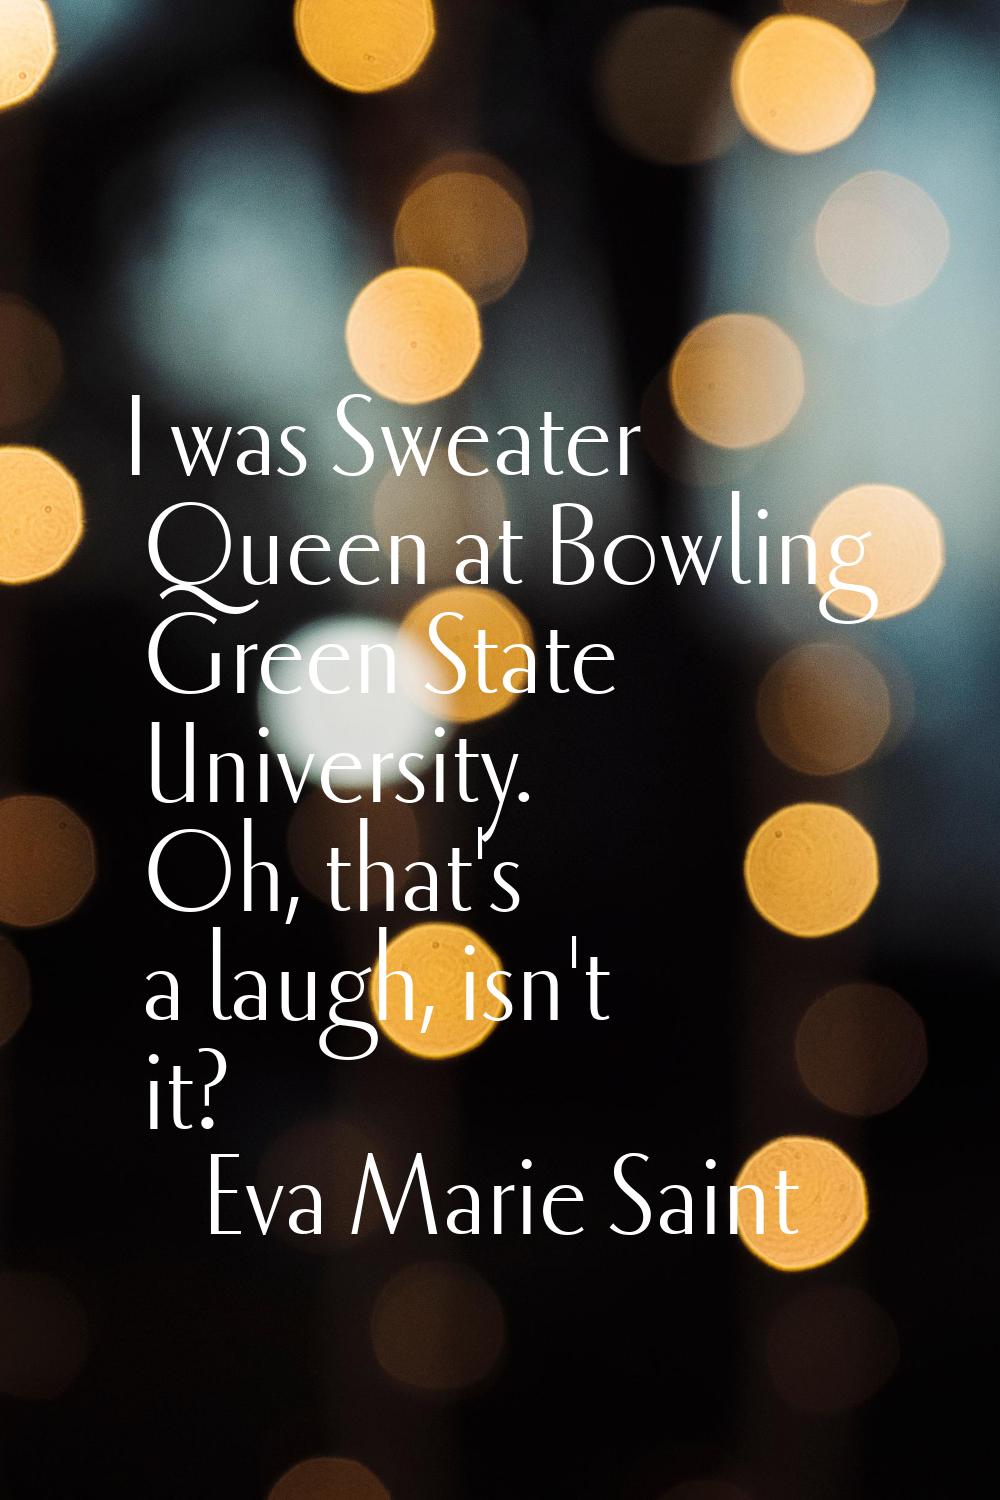 I was Sweater Queen at Bowling Green State University. Oh, that's a laugh, isn't it?